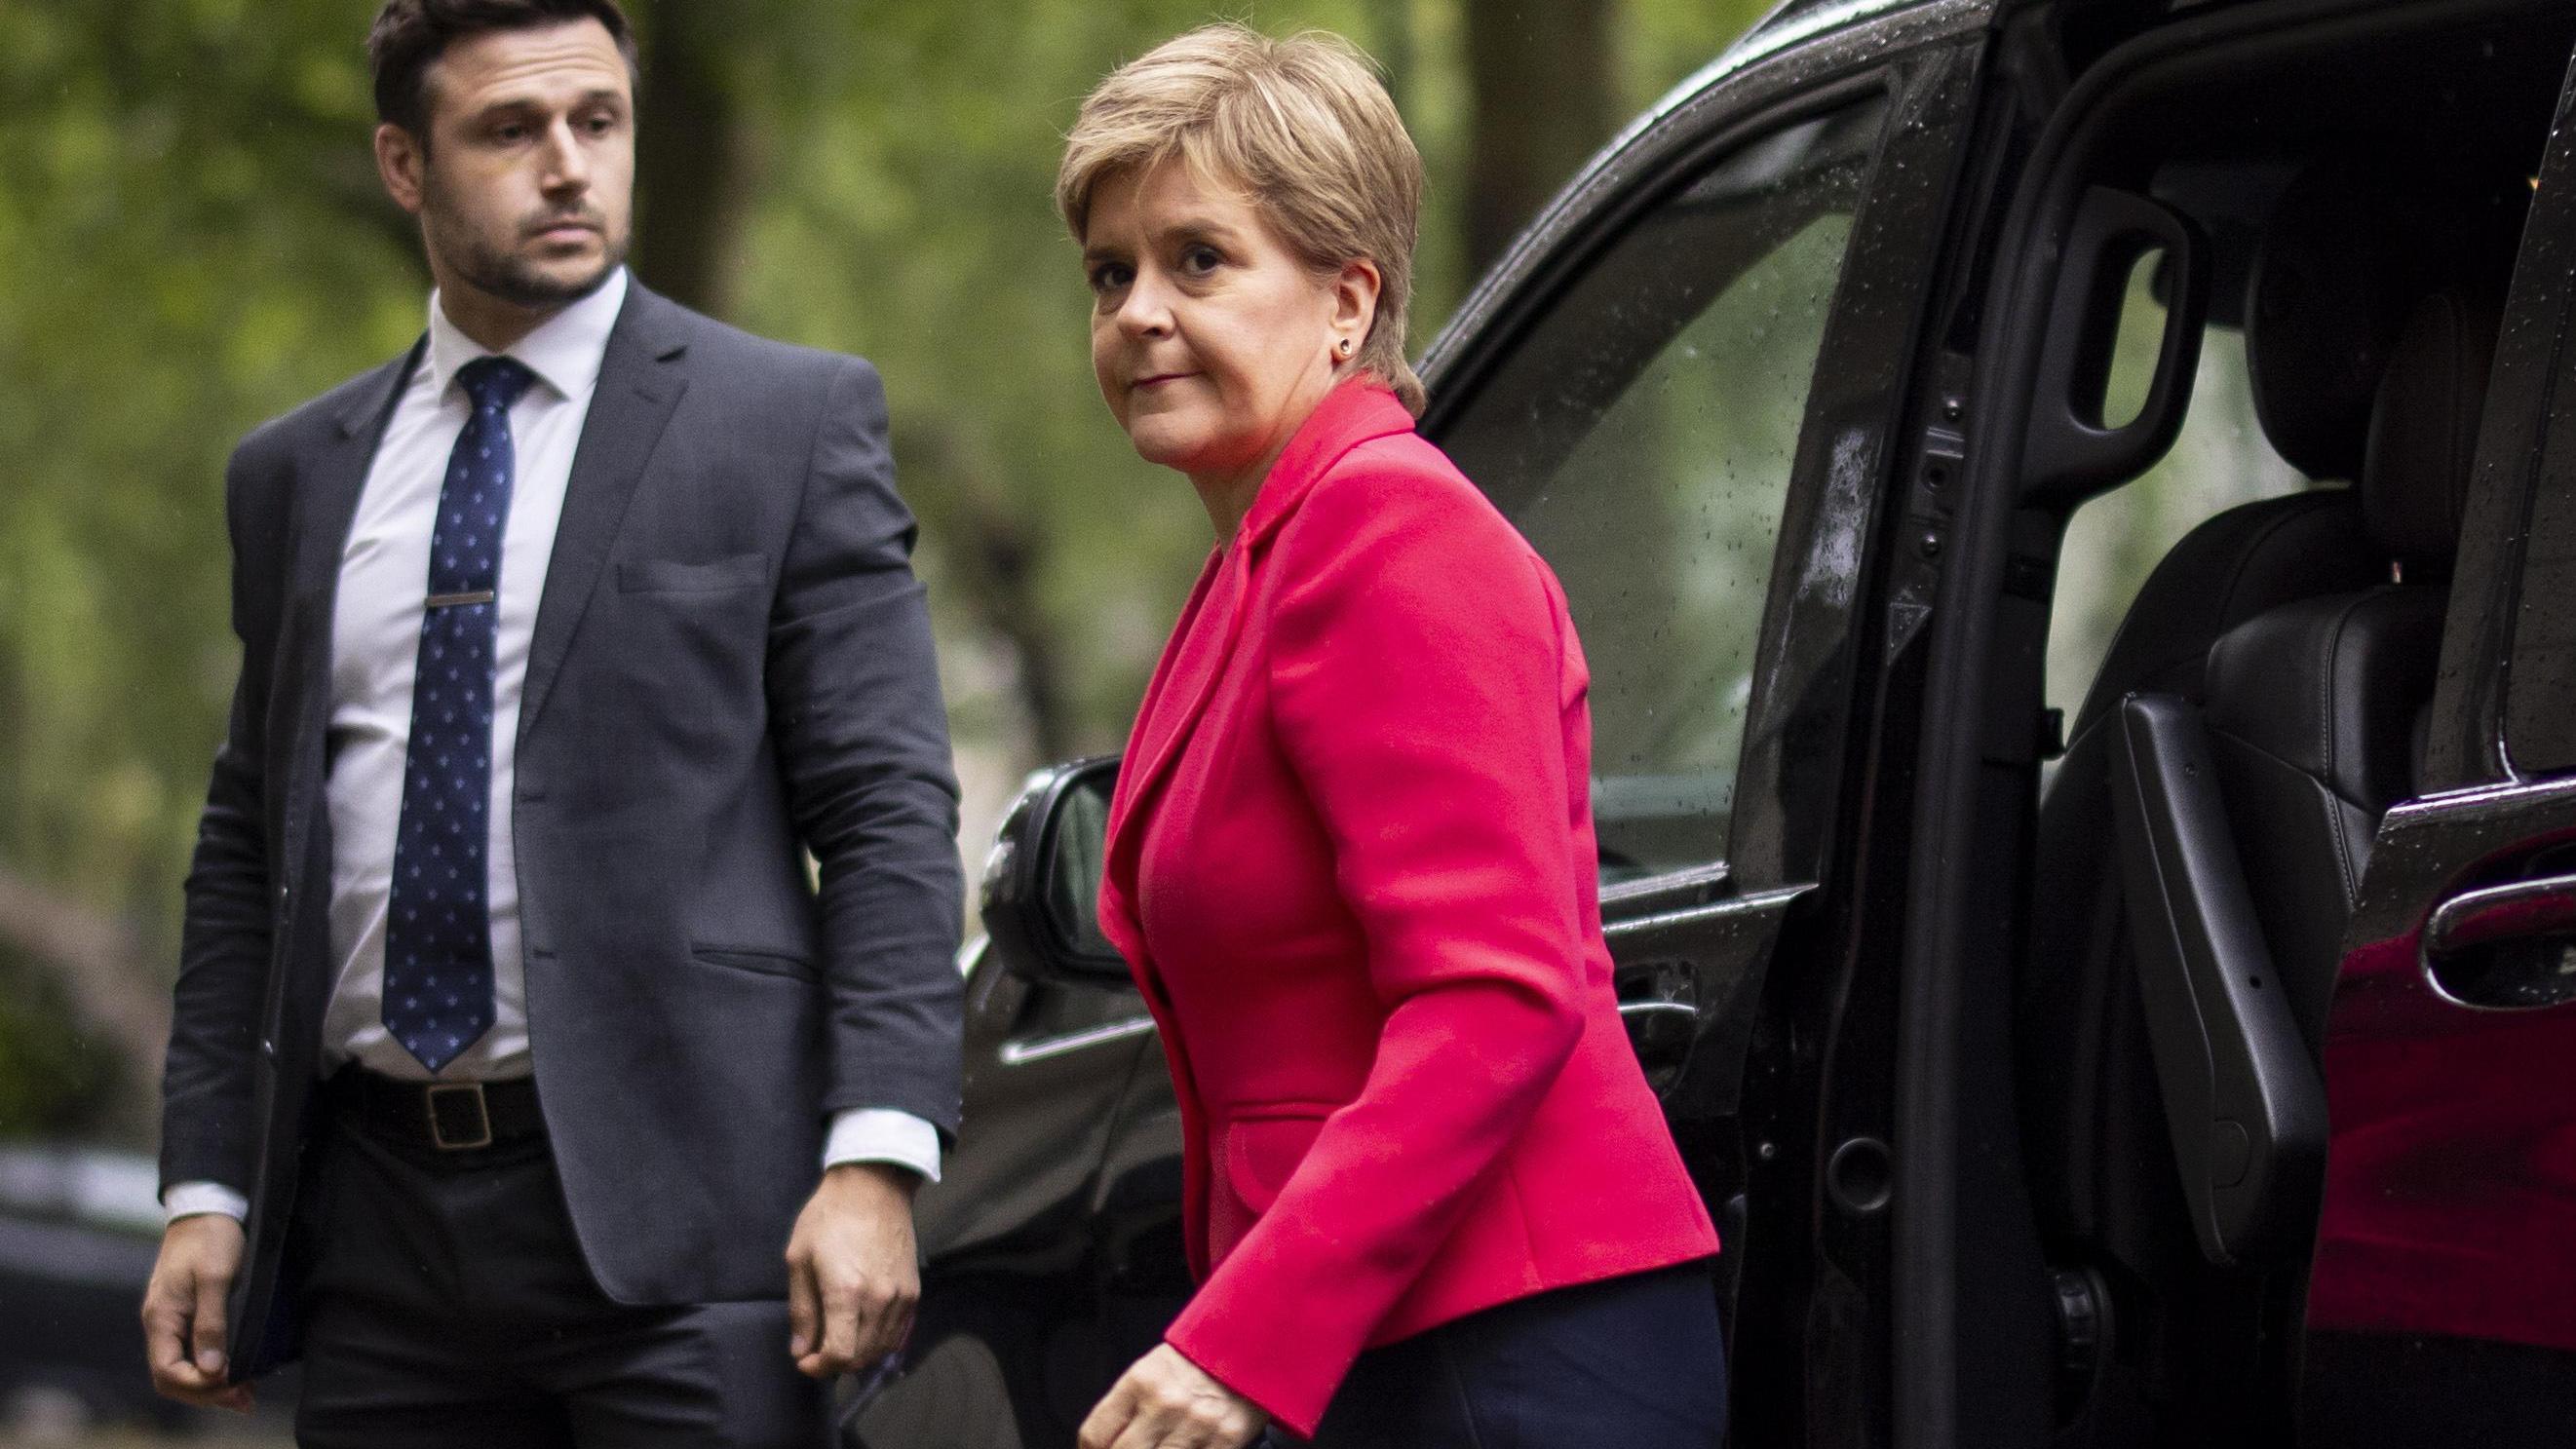 Sturgeon’s £600,000 police protection withdrawn